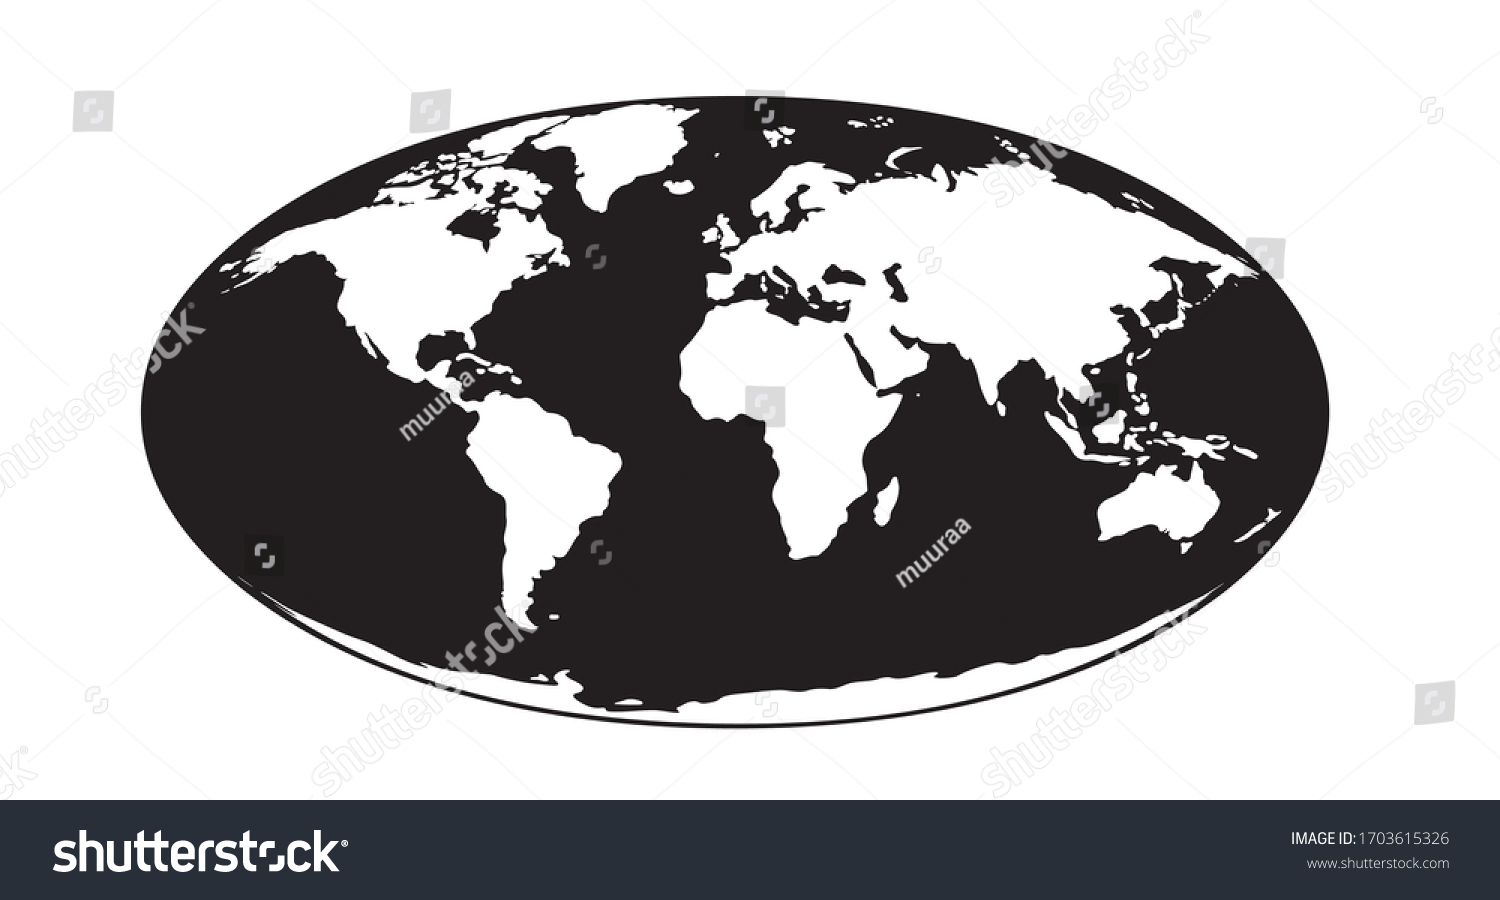 Simplified oval world map illustration with main - Royalty Free Stock ...